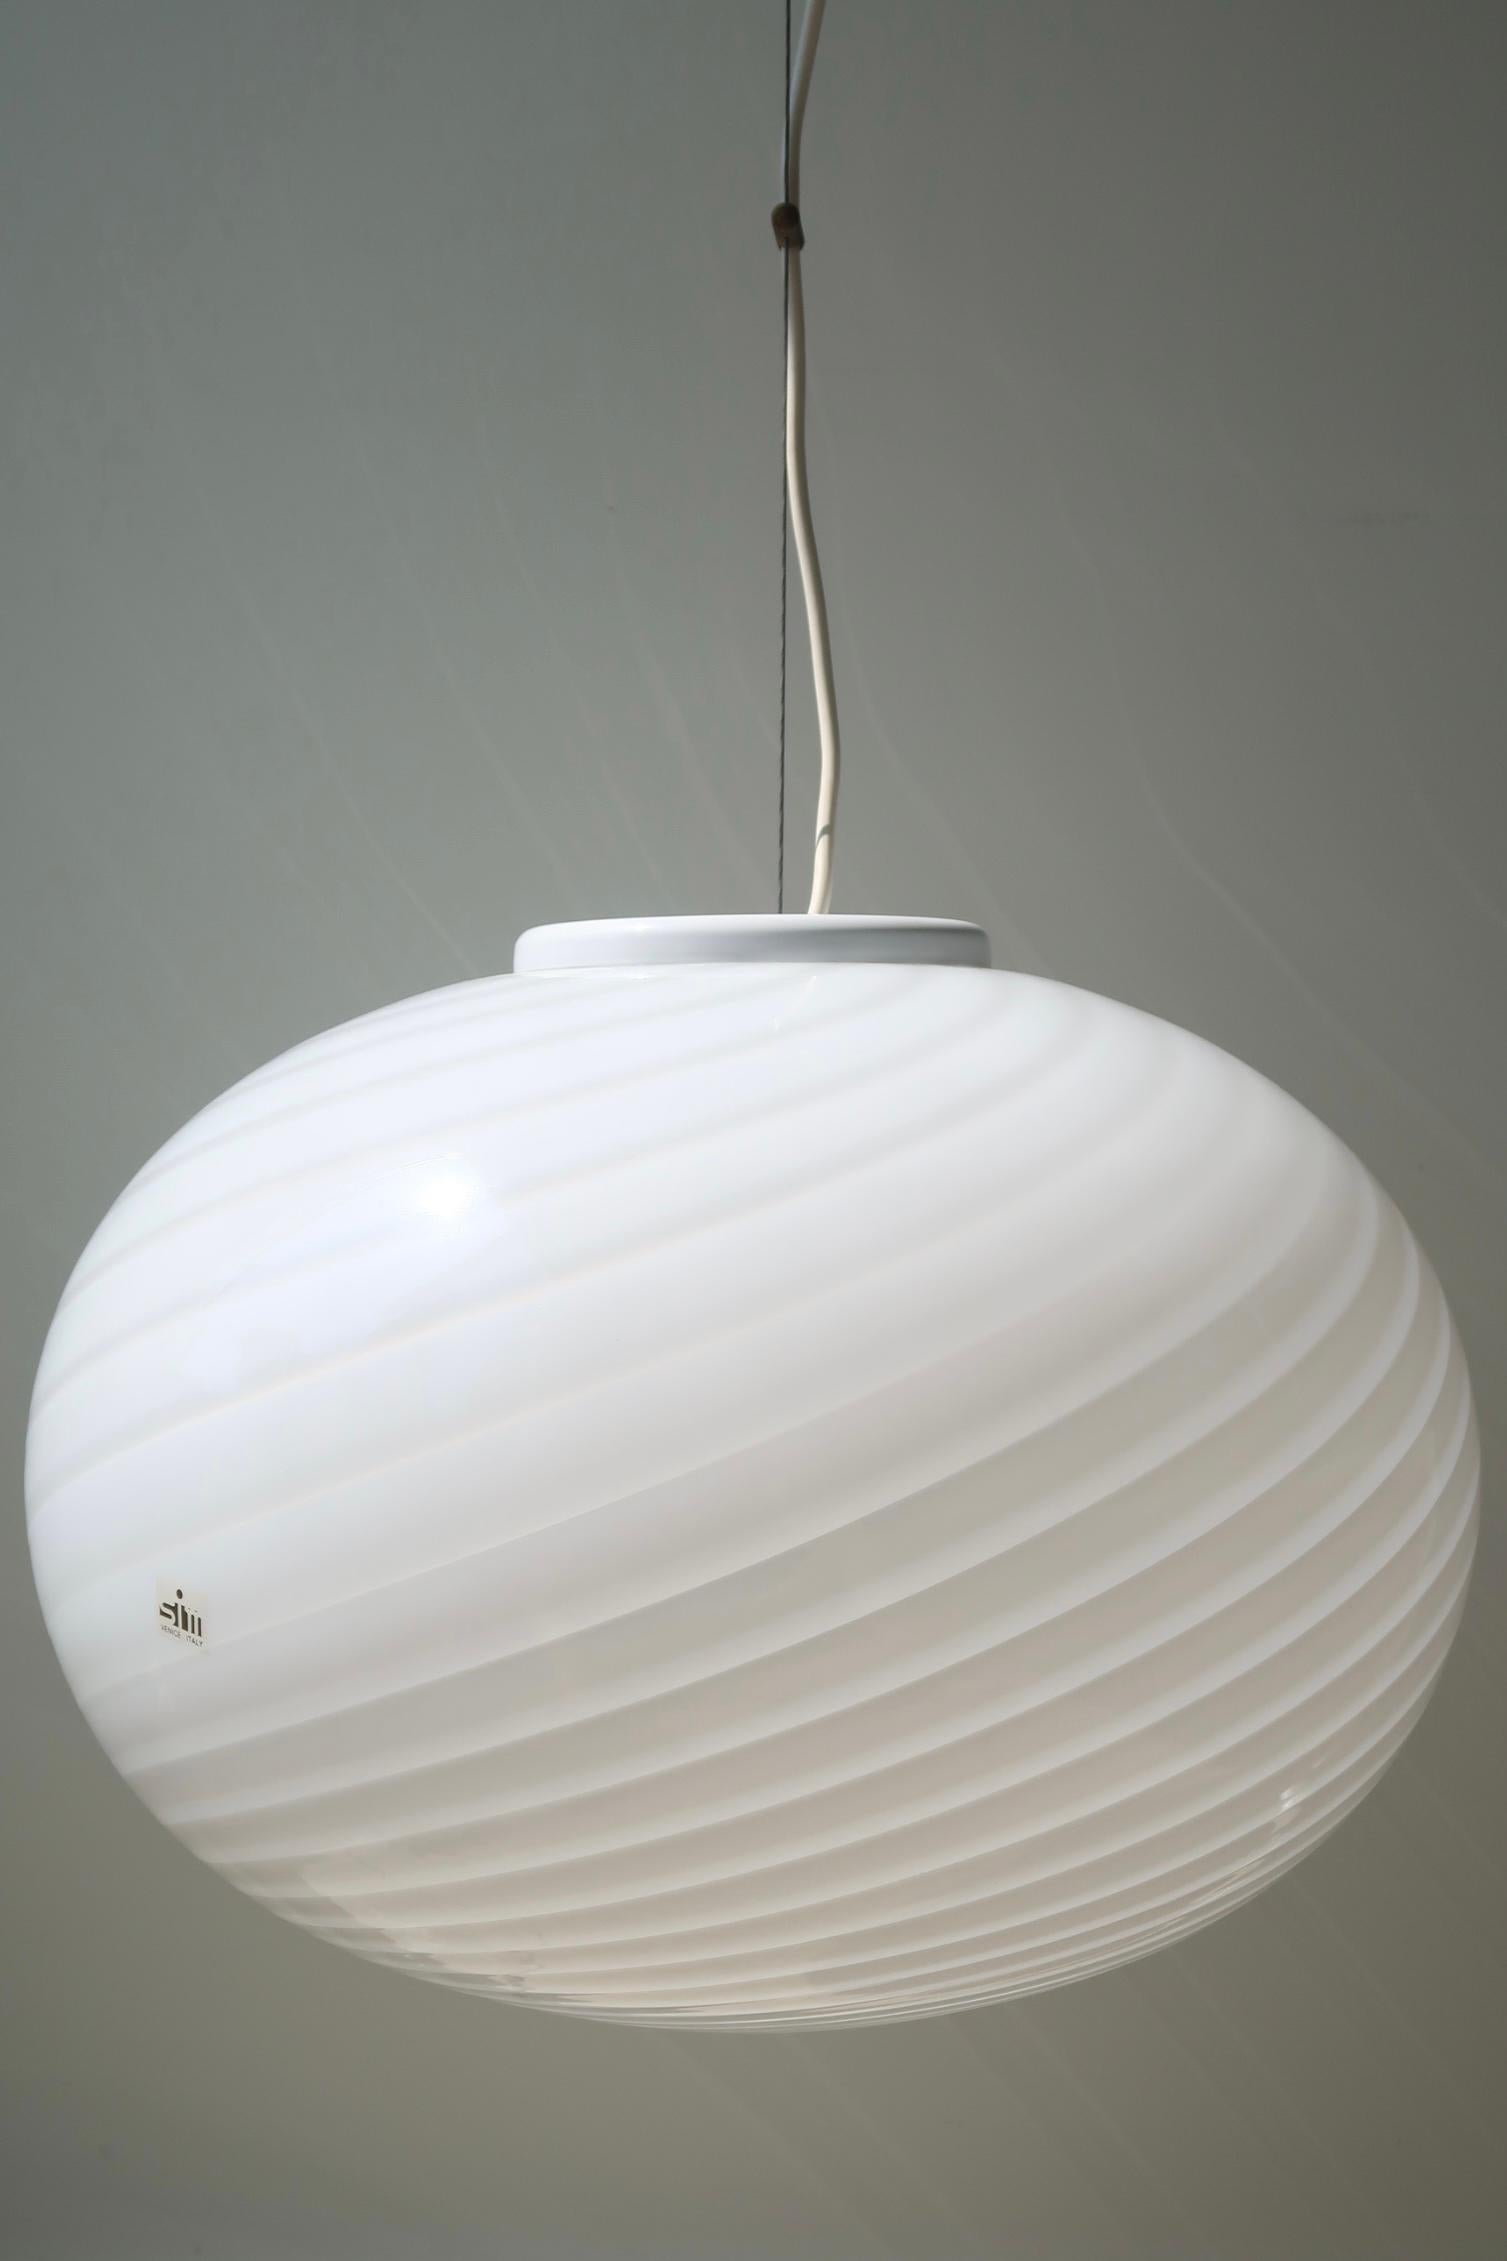 Extra large vintage Murano pendant ceiling lamp in white opaline glass. The glass is mouth-blown in an oval shape with a beautiful swirl pattern. Handmade in Italy, 1970s, and comes with adjustable suspension and original label.
D: 45 cm
